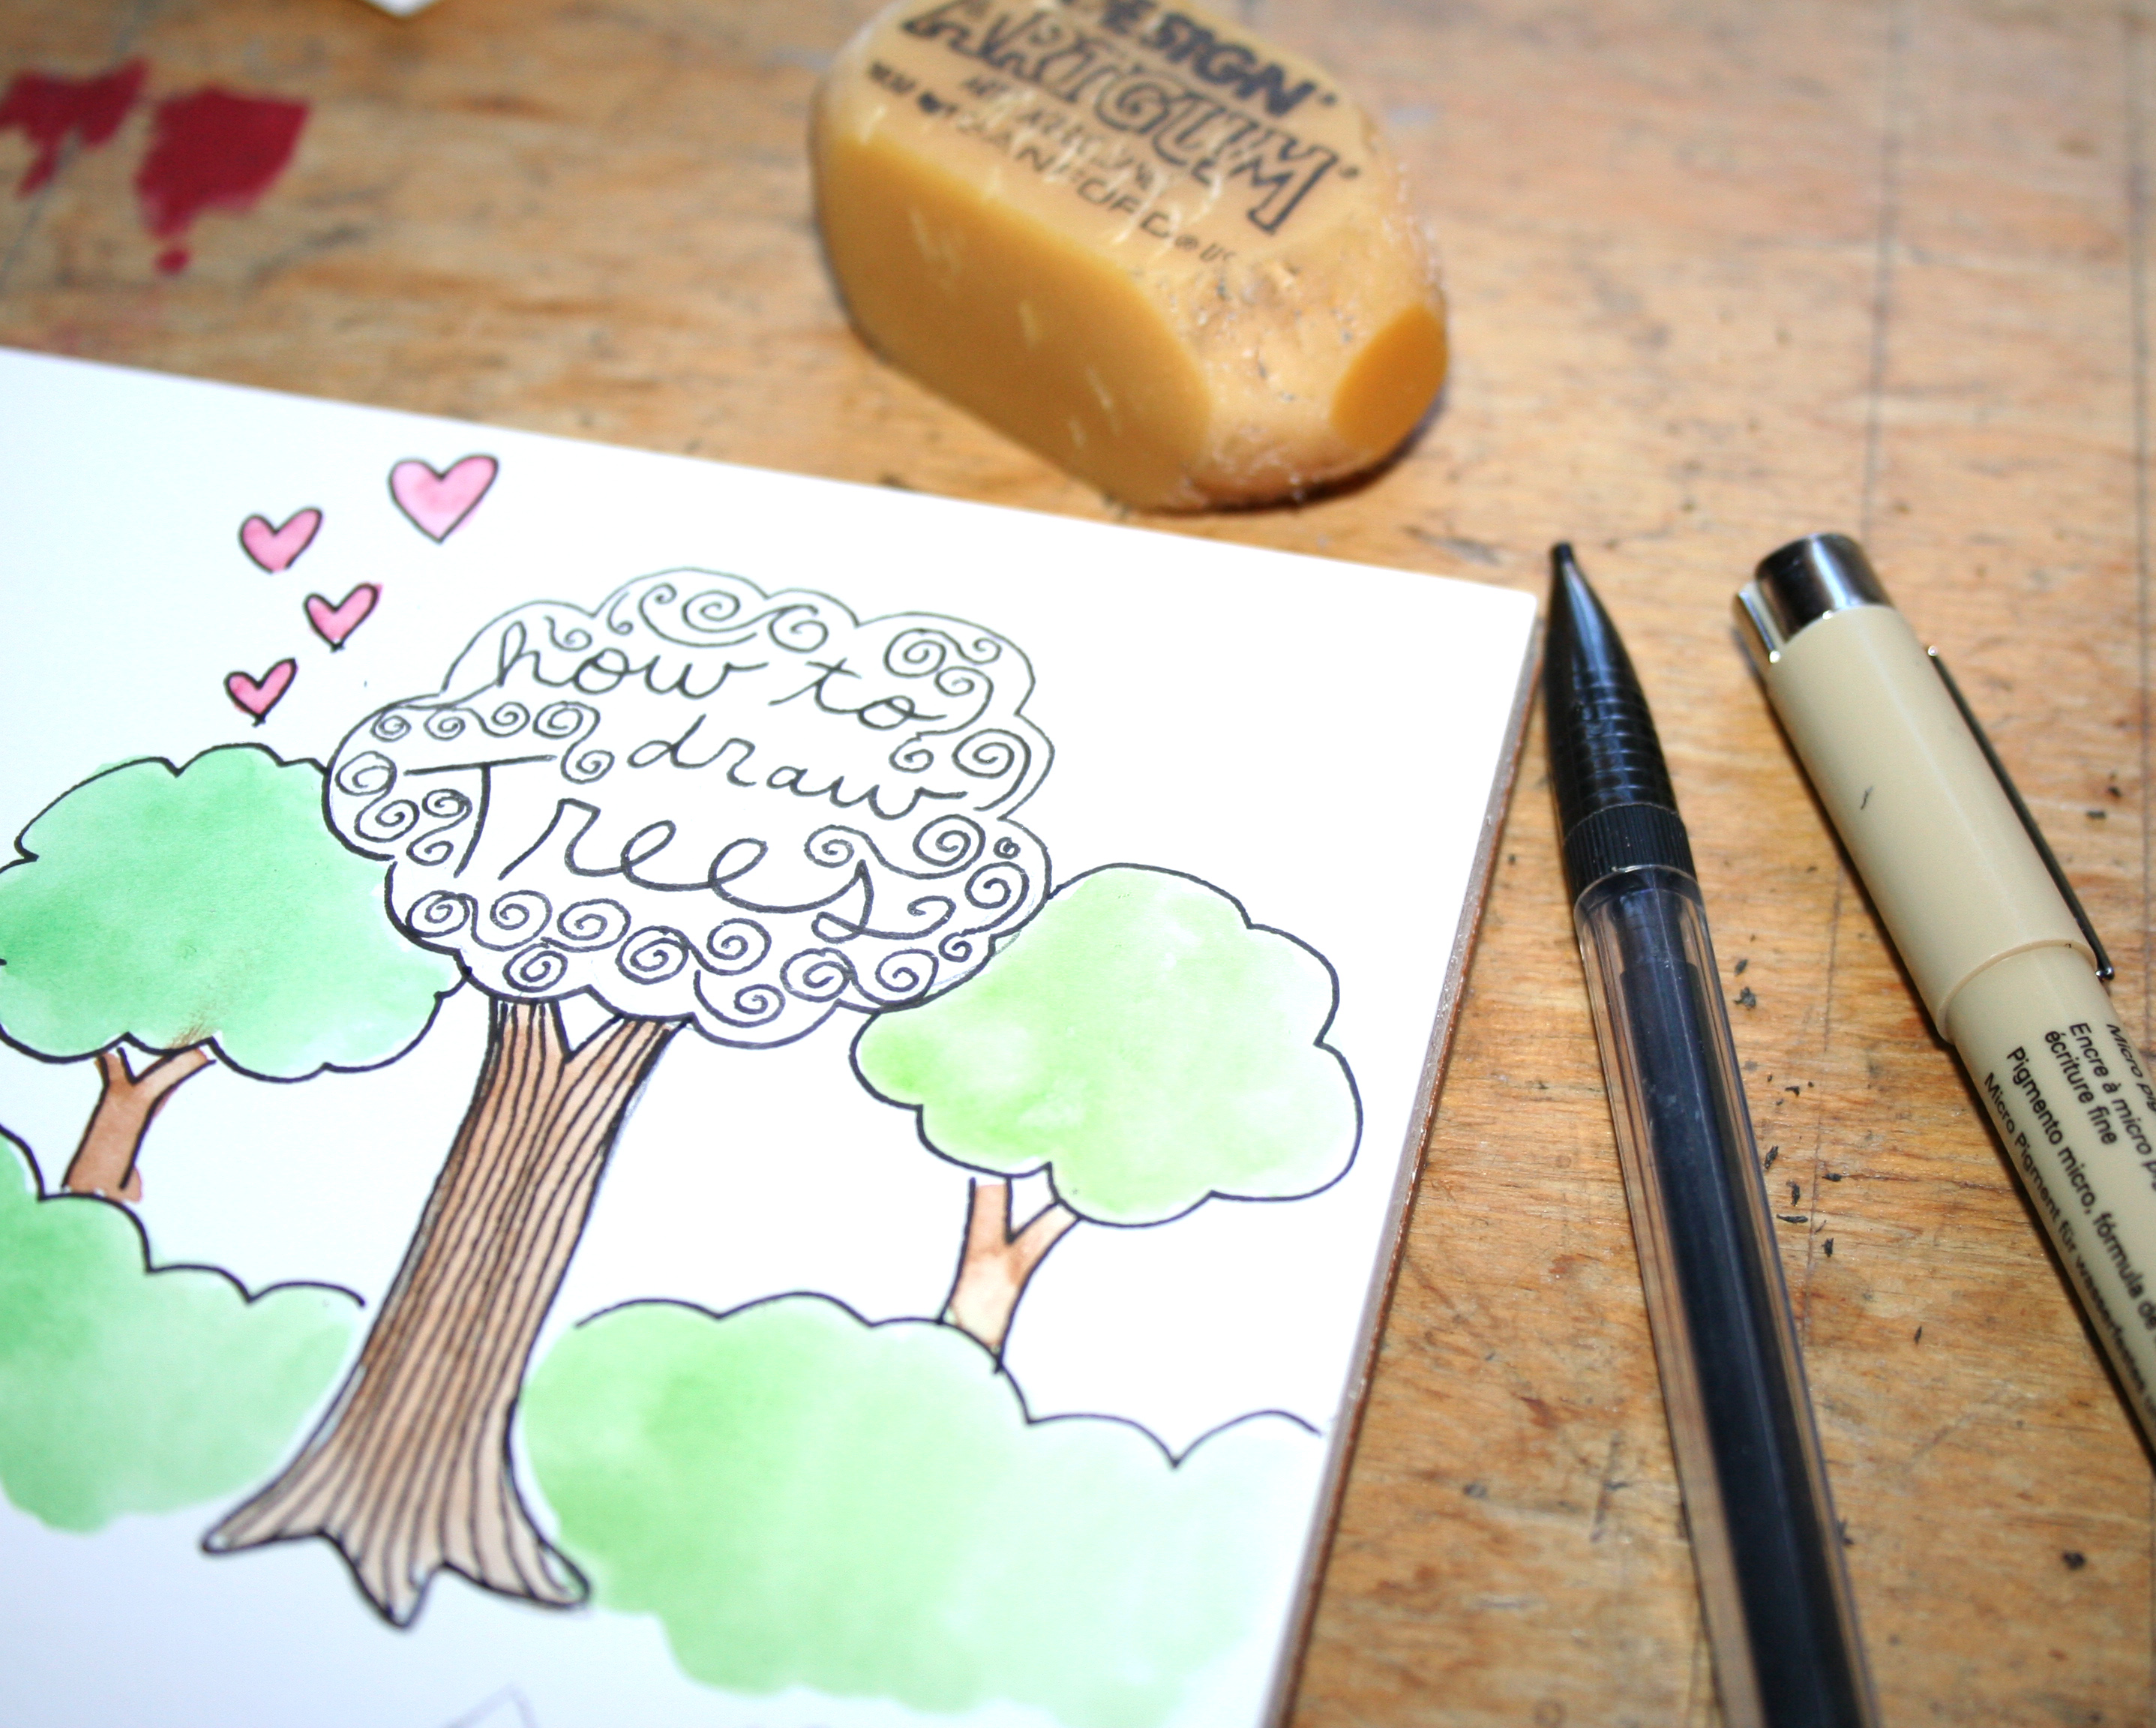 How to draw trees